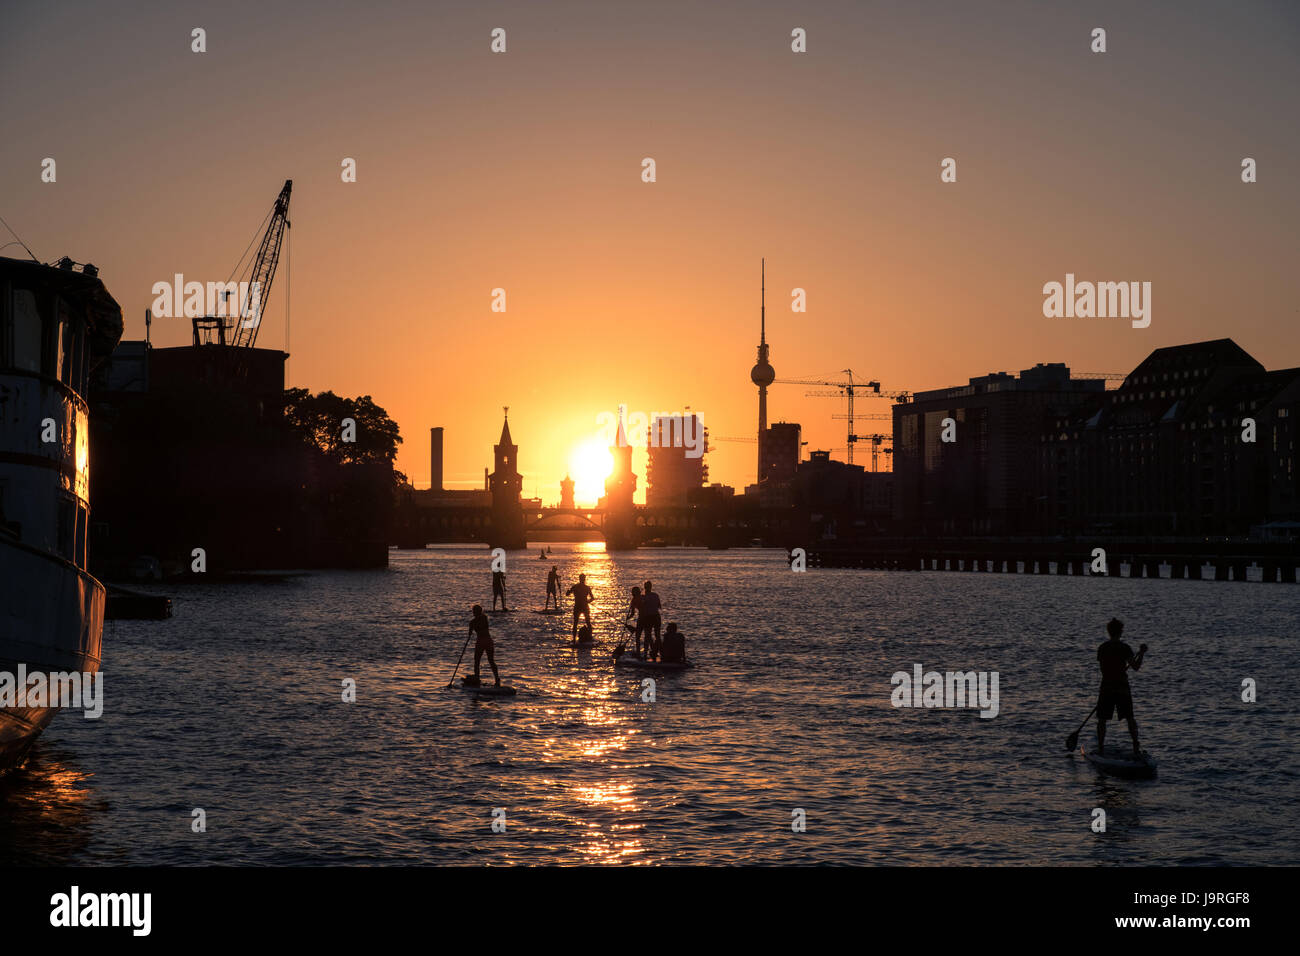 Group of paddle board / stand up paddler on river spree in Berlin - Oberbaum Bridge, Tv Tower and sunset sky background Stock Photo